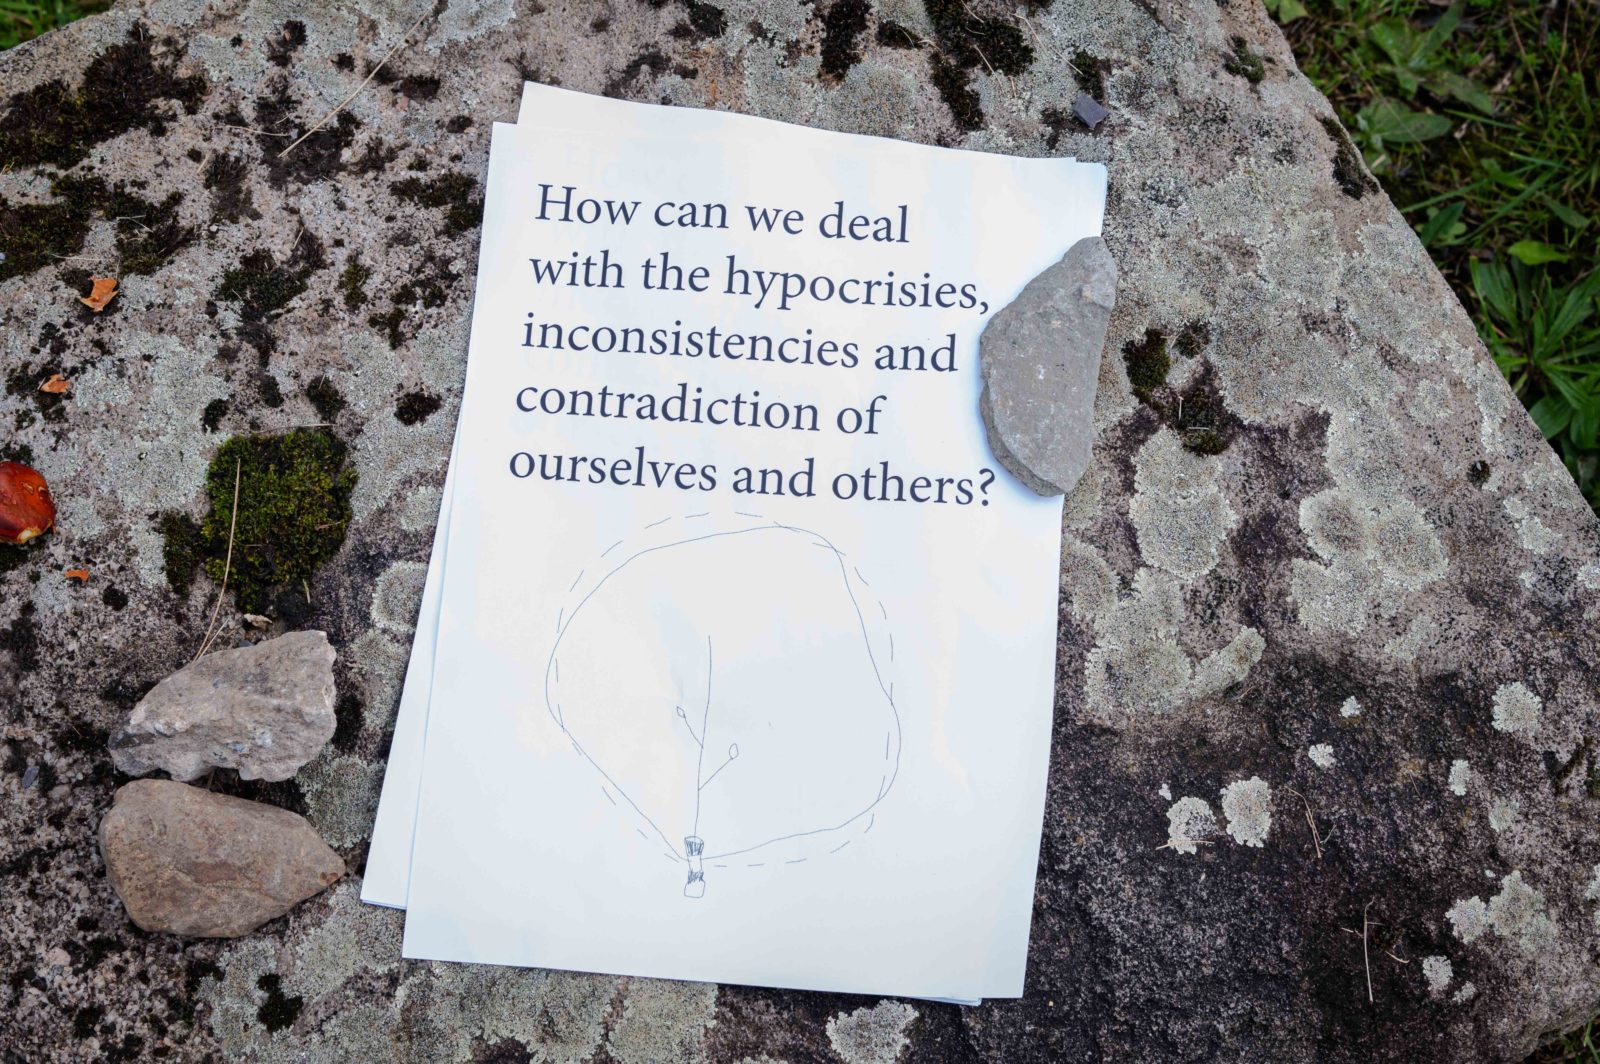 A sheet of paper that reads 'How can we deal with the hypocrisies, inconsistencies and contradiction of ourselves and others?', with a simple line illustration underneath is photographed on a rock.